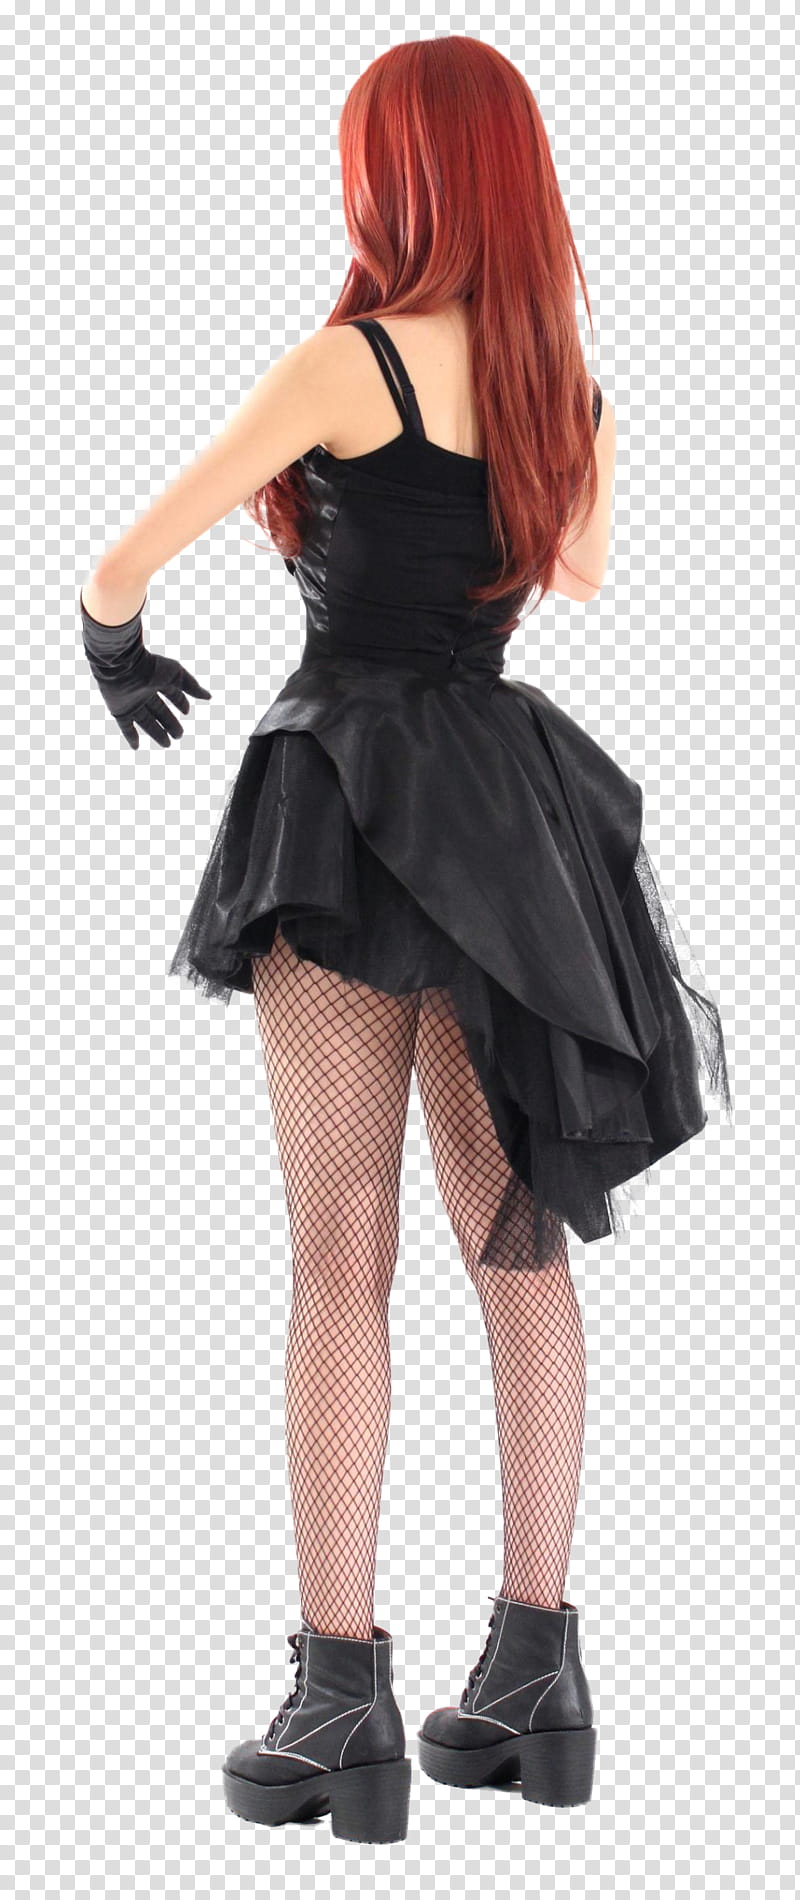 T ara, woman in black high-low dress transparent background PNG clipart